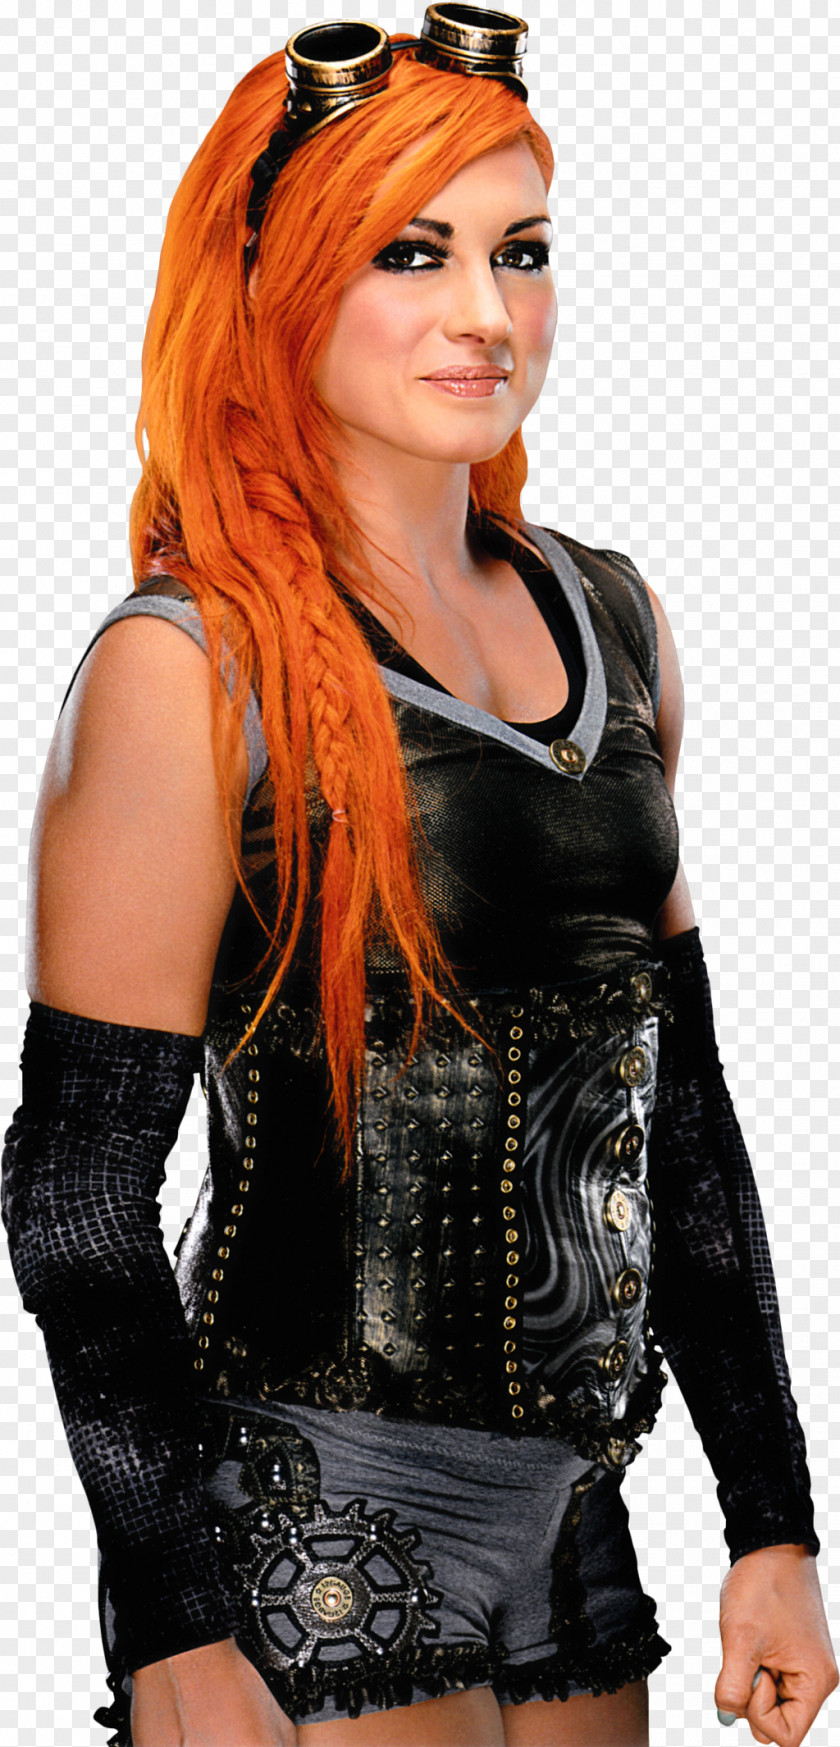 Becky Lynch WWE SmackDown Raw Women's Championship Women In PNG in WWE, becky g clipart PNG